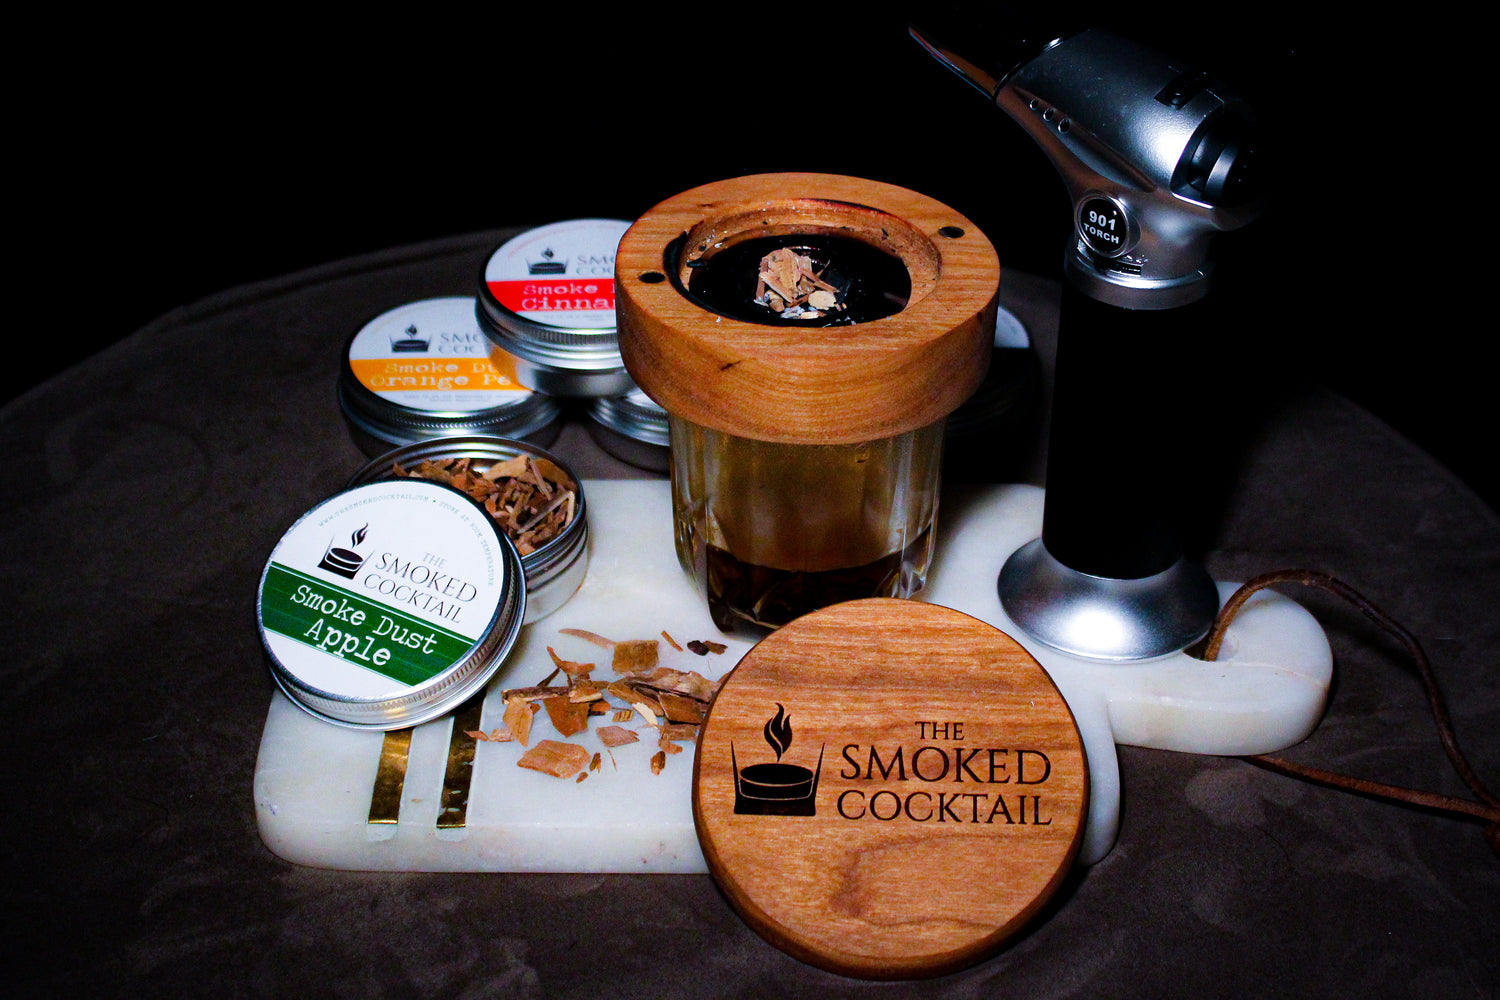 The Smoked Cocktail's cocktail smoker kit is a must-have for cocktail lovers everywhere. With our top-quality American Cherry smoker, smoke dusts, and torch, you'll be able to create the most delicious smoked whiskey drinks that will wow your friends and family.